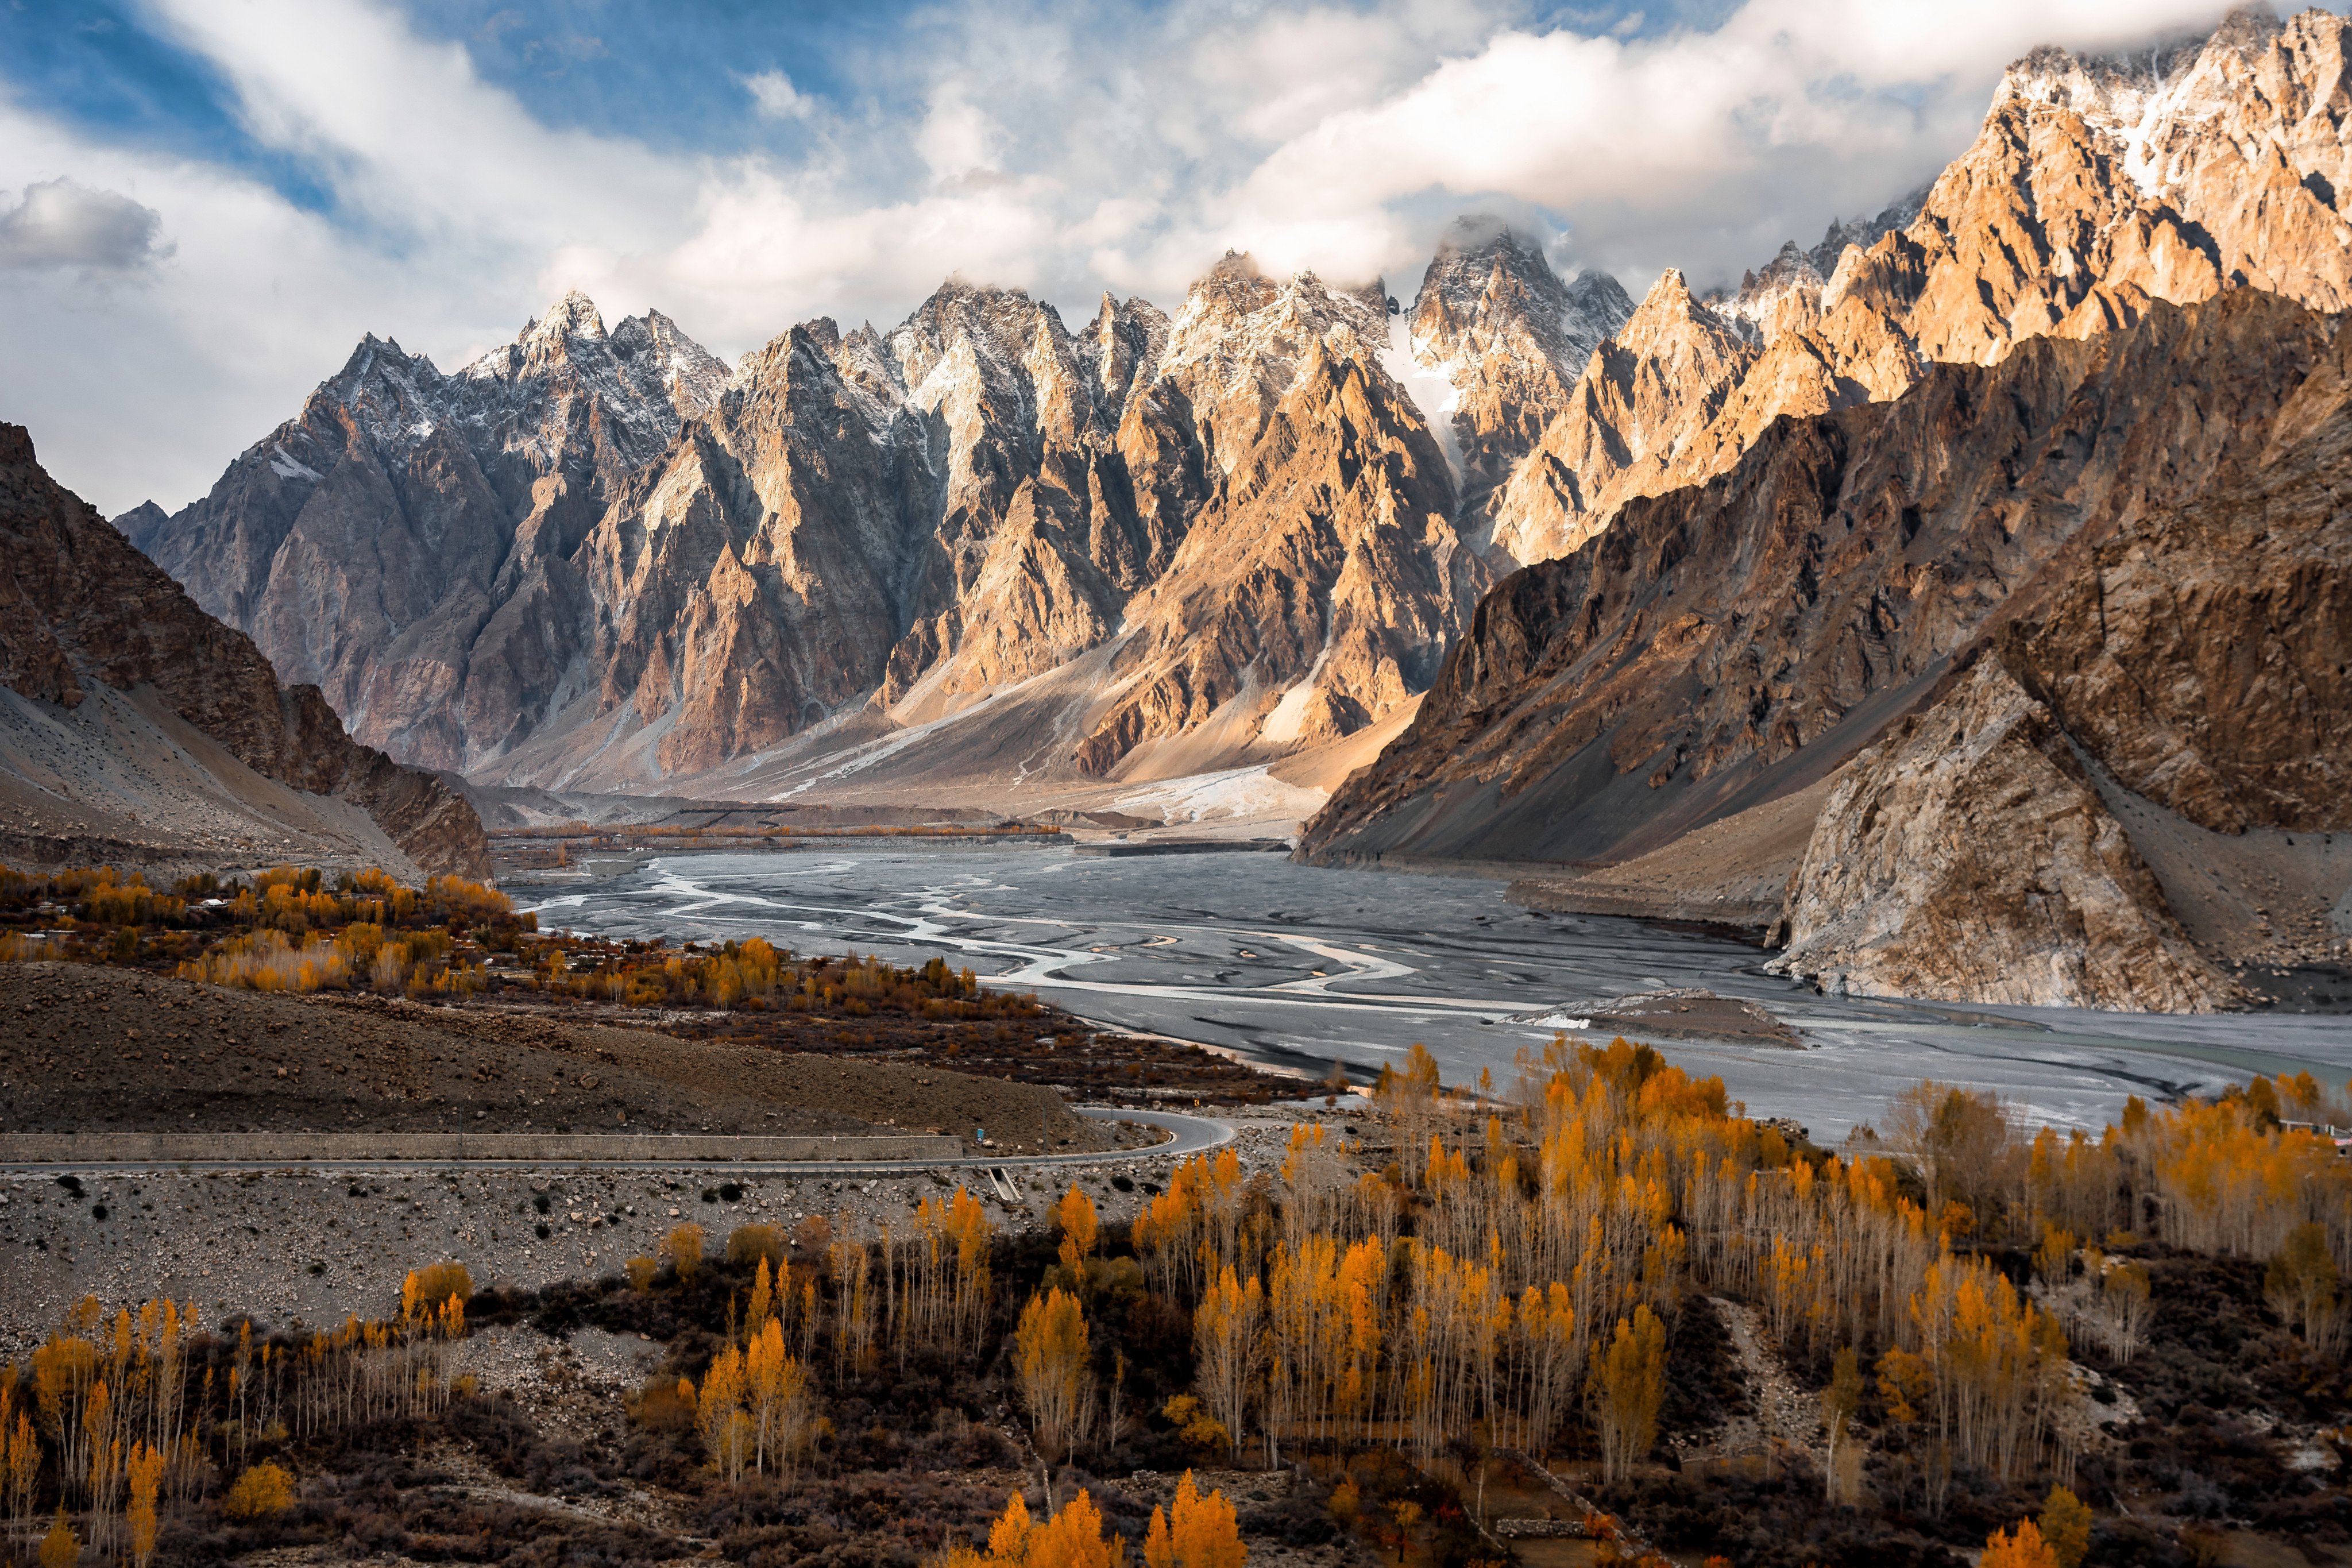 Two Japanese climbers went missing in Pakistan this week. Photo: Getty Images